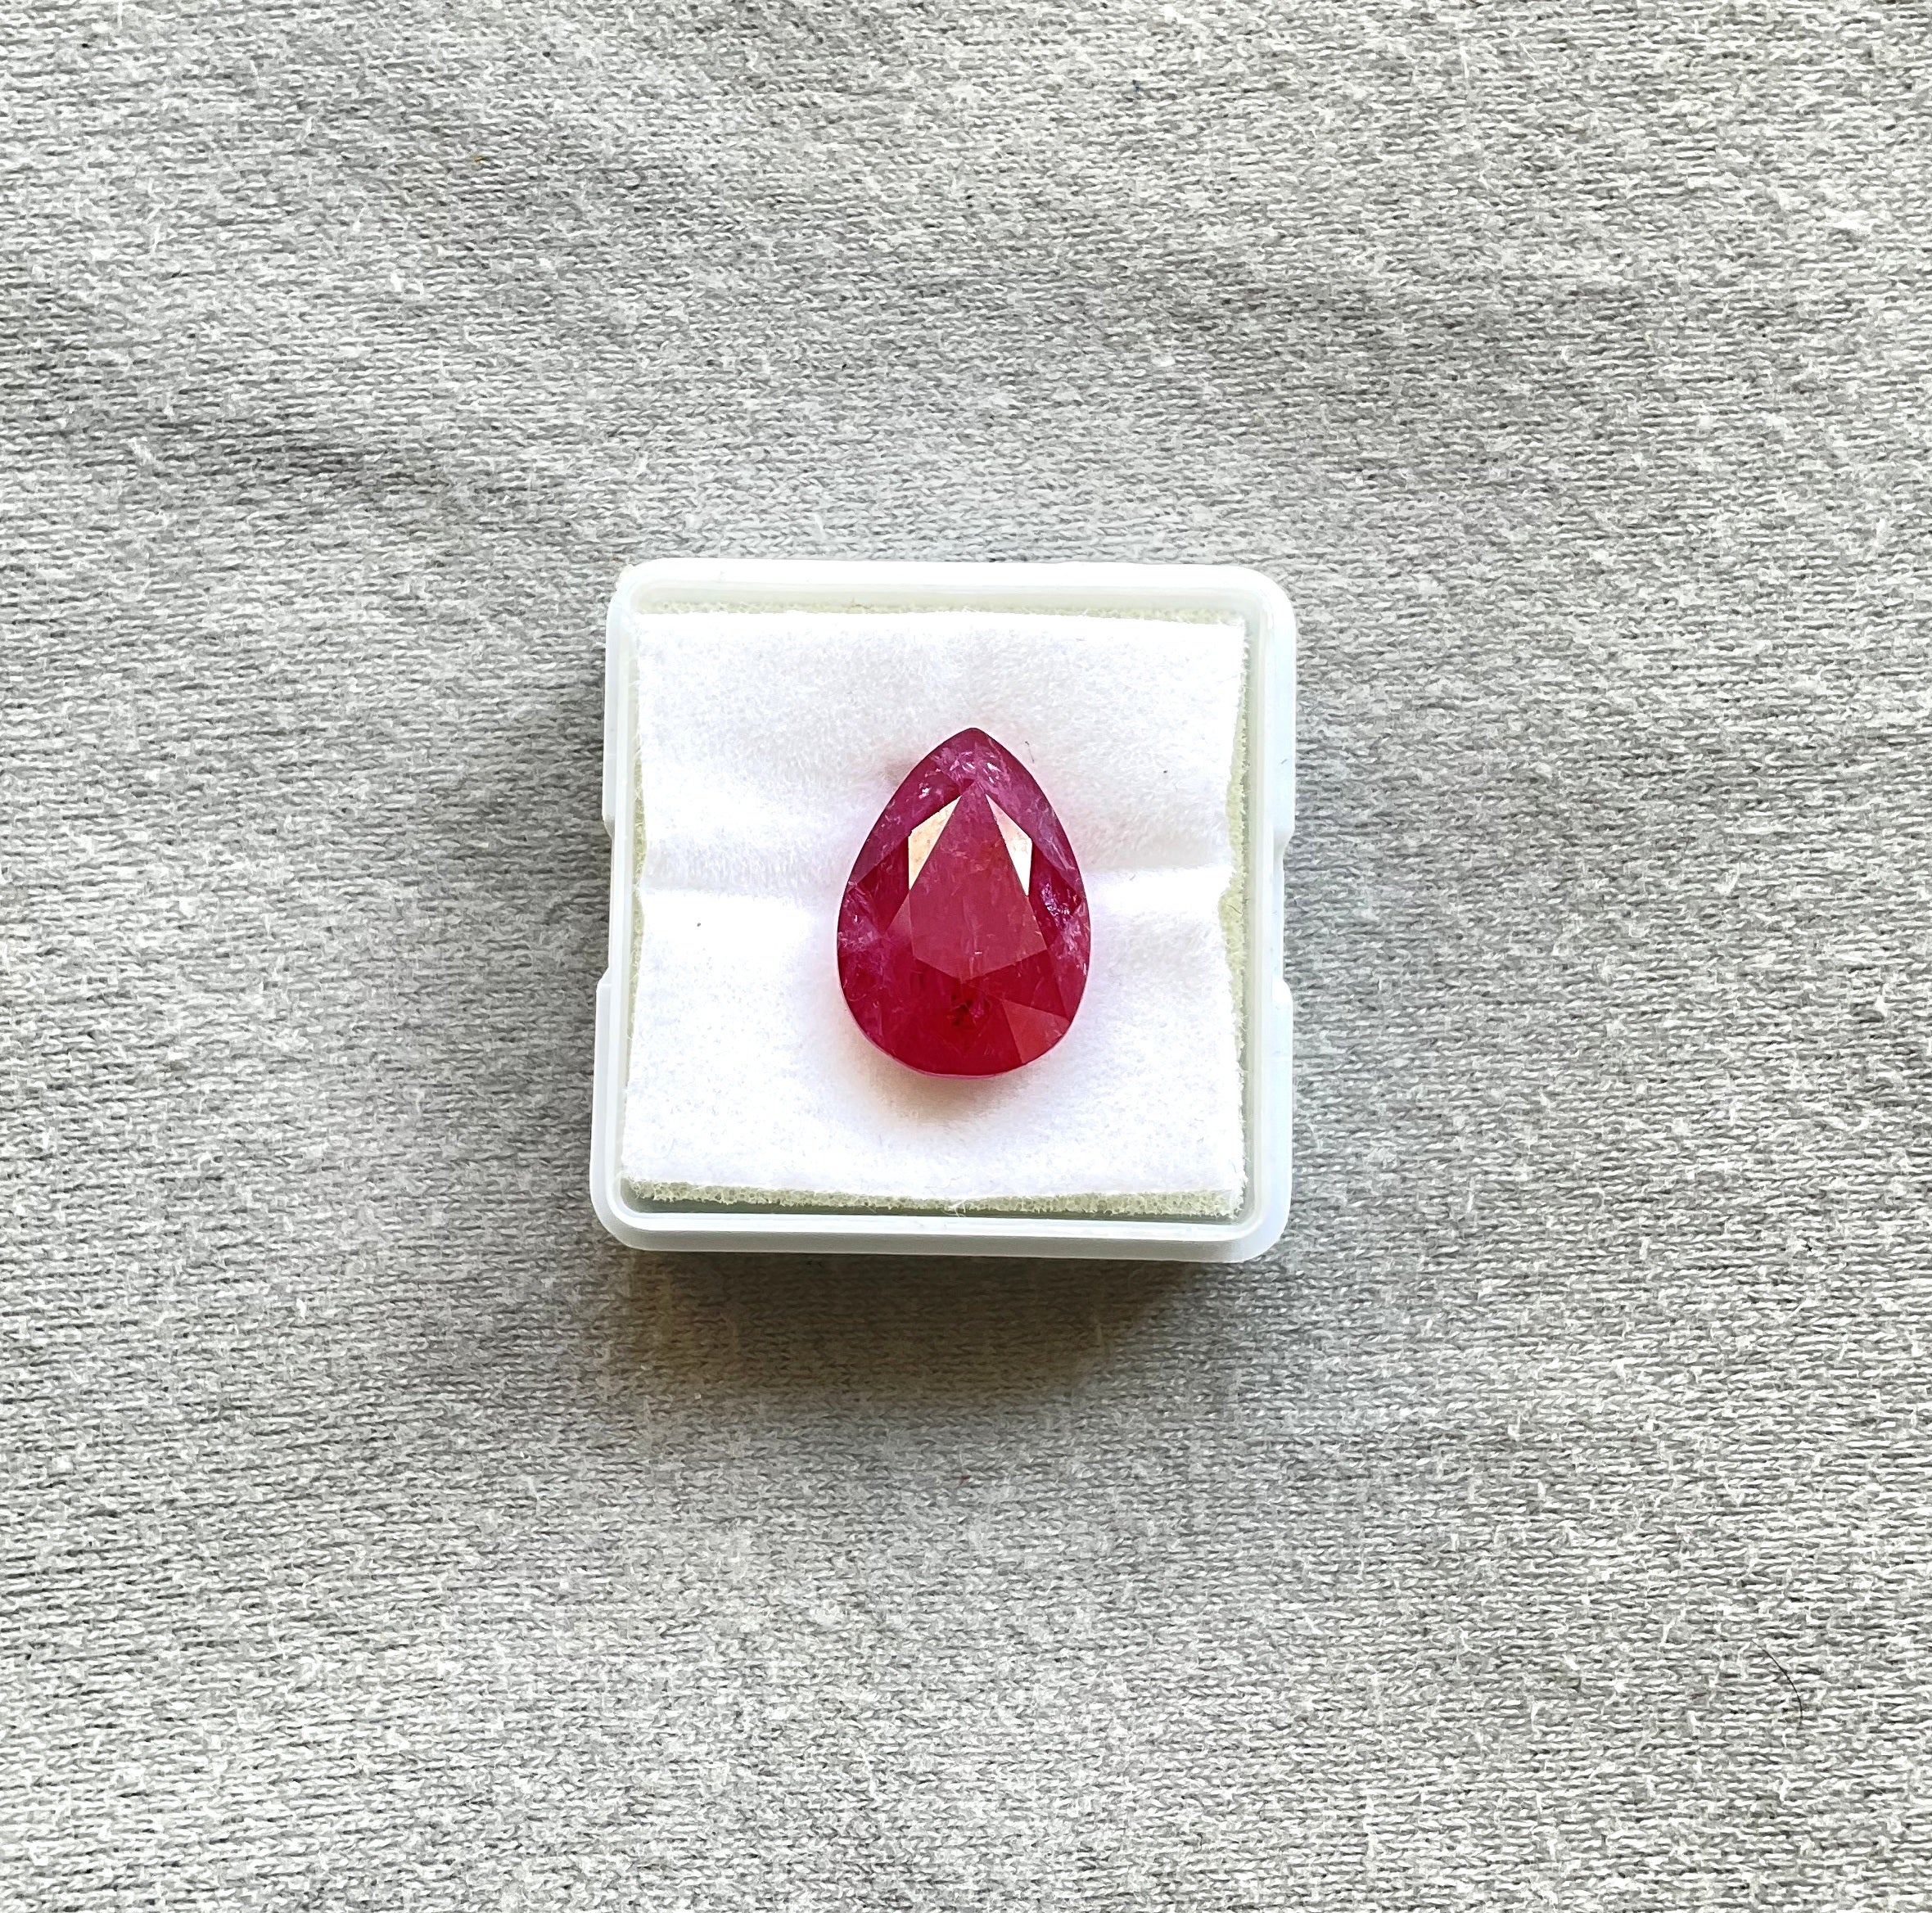 As we are auction partners at Gemfields, we have sourced these rubies from winning auctions and had cut them in our in house manufacturing responsibly.

Weight: 10.44 Carats
Size: 15x11x7 MM
Pieces: 1
Shape: Faceted Pear